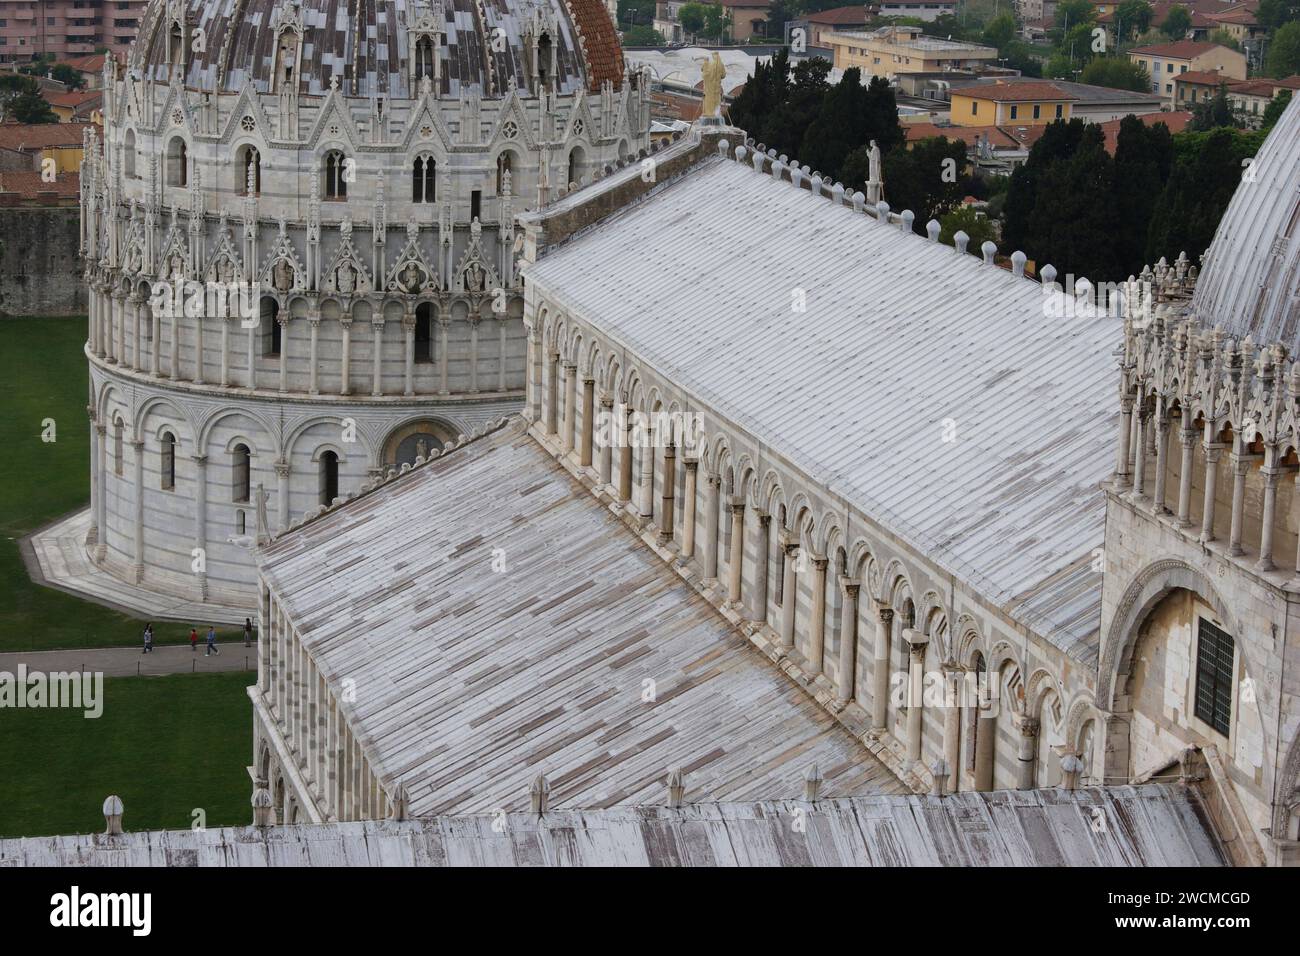 Details of Pisa Dome, viewed from the Leaning Tower, with a long lens Stock Photo